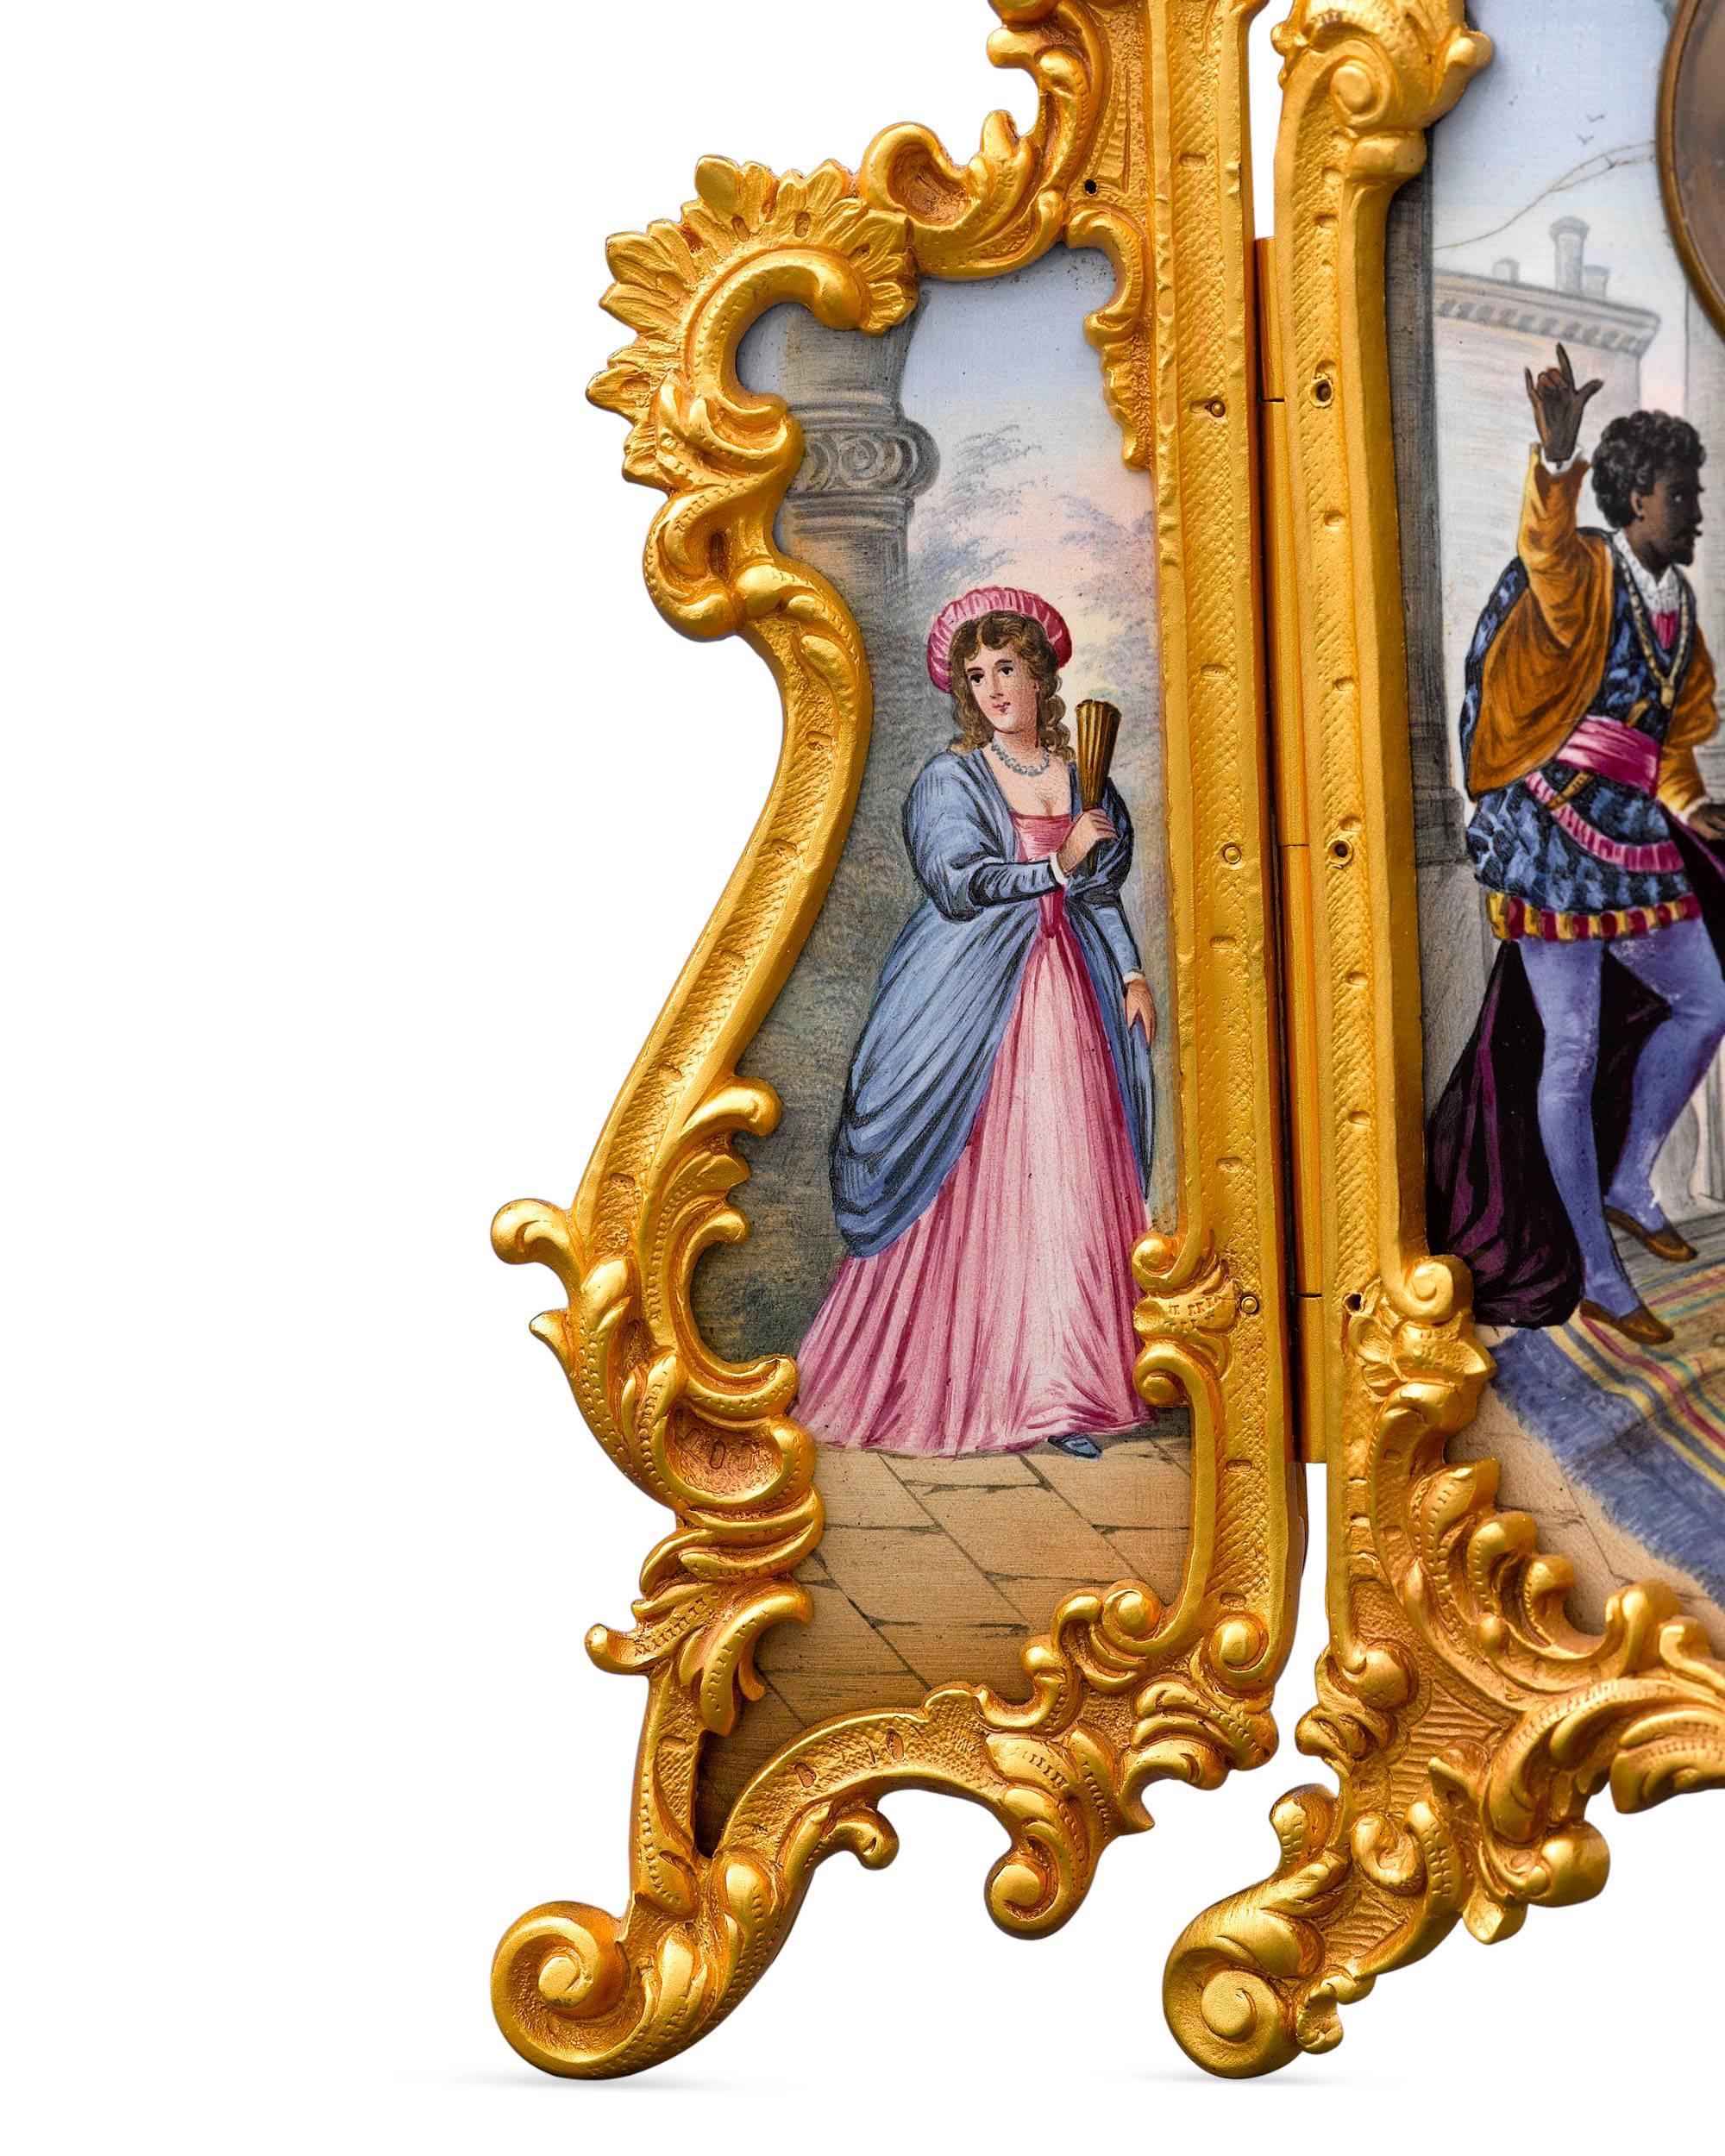 Characters from the famed Shakespearean play Othello are brought to life in this elegant triptych porcelain painting and clock. Othello, the doomed Moor is depicted addressing his bride Desdemona and her father Brabantio beneath an exquisite enamel